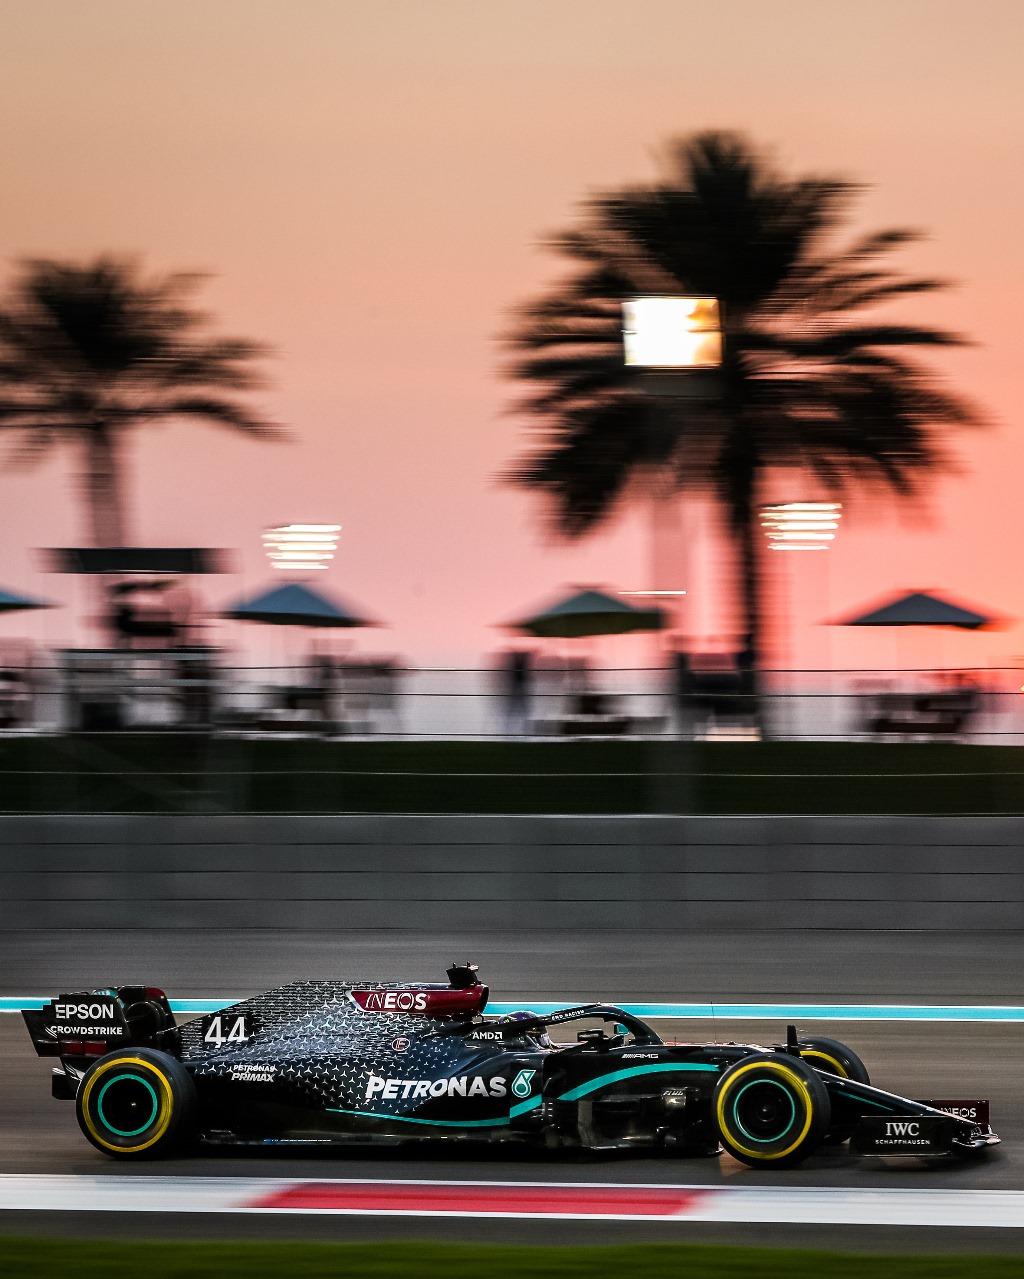 Mercedes Amg Petronas F1 Team The Weekend Is In Sight